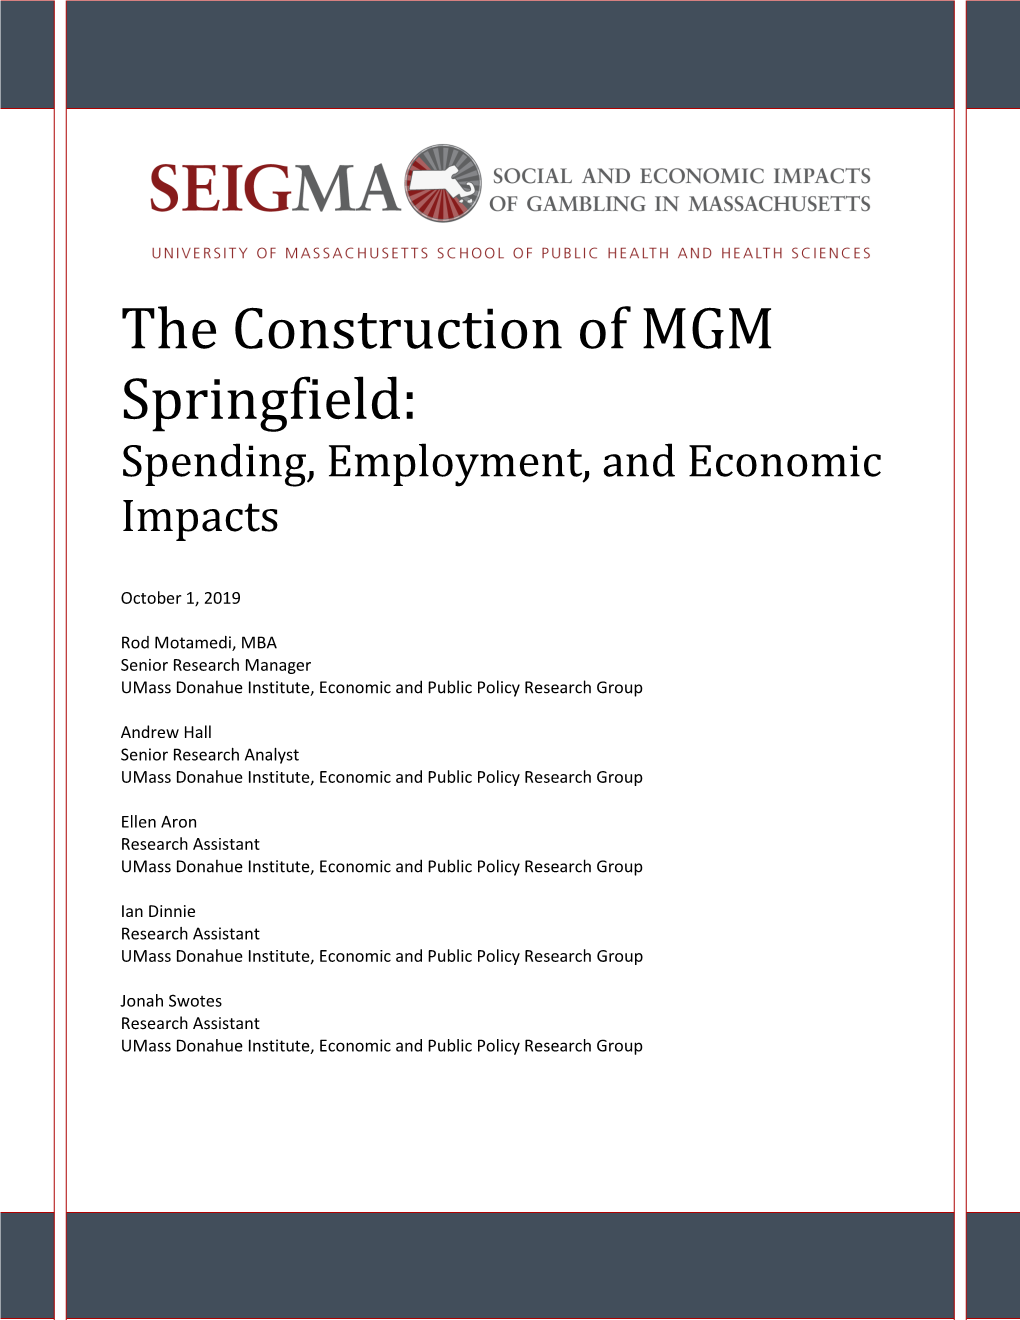 The Construction of MGM Springfield: Spending, Employment, and Economic Impacts